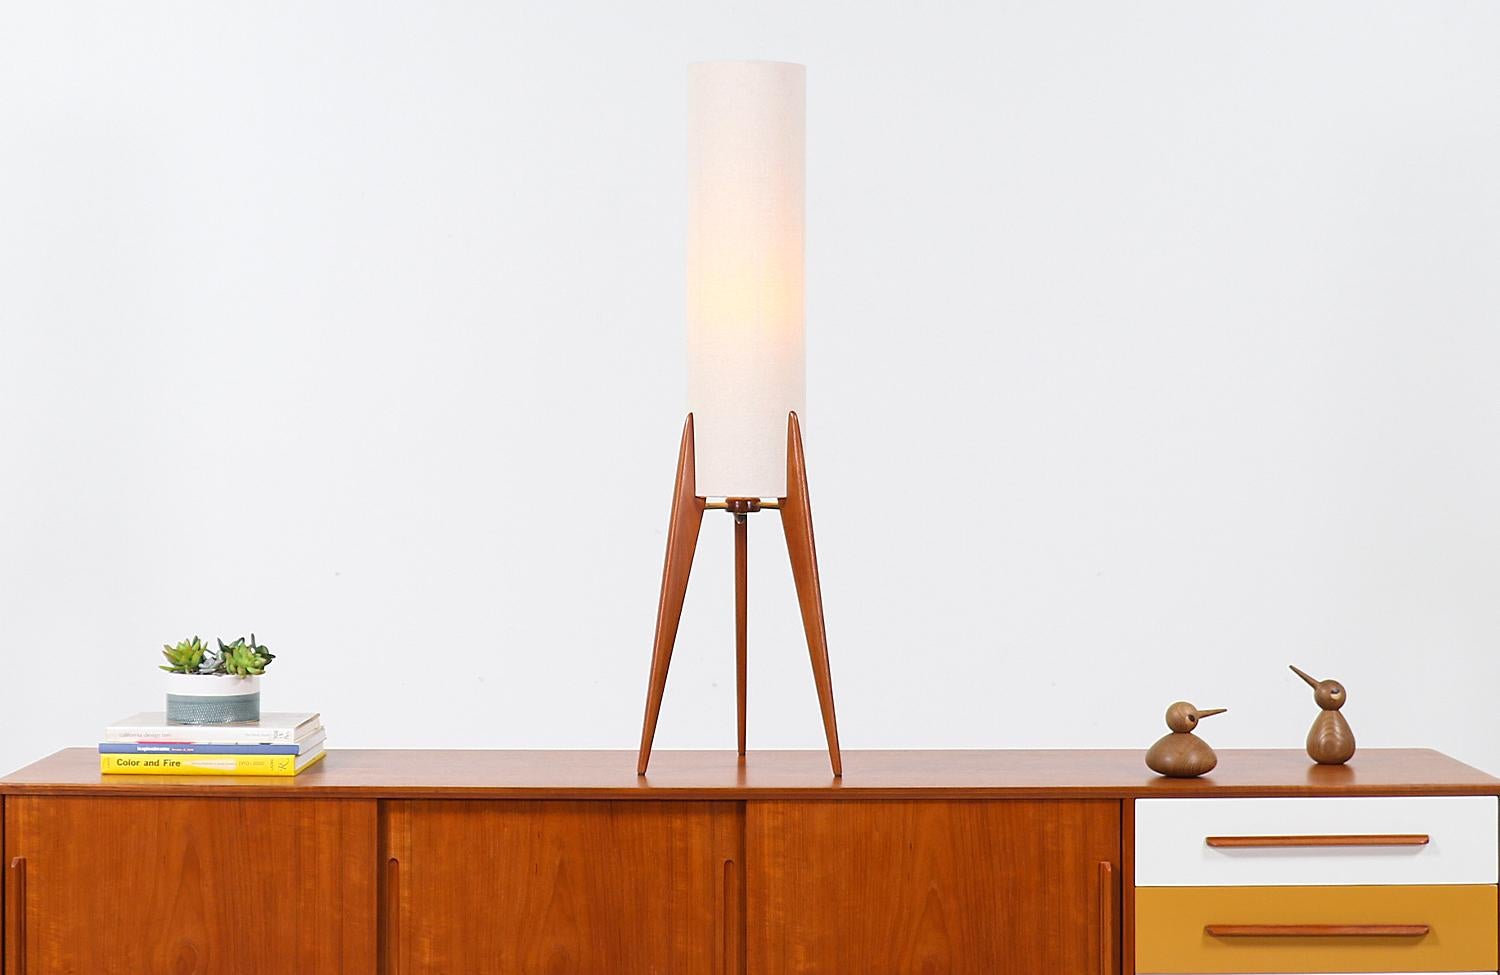 Elegant tripod table lamp designed and manufactured in Denmark, circa 1960s. This rare Danish modern design features a tripod teak base that holds the new custom cylindric linen shade adding a warm flair of light to any room. The three teak legs